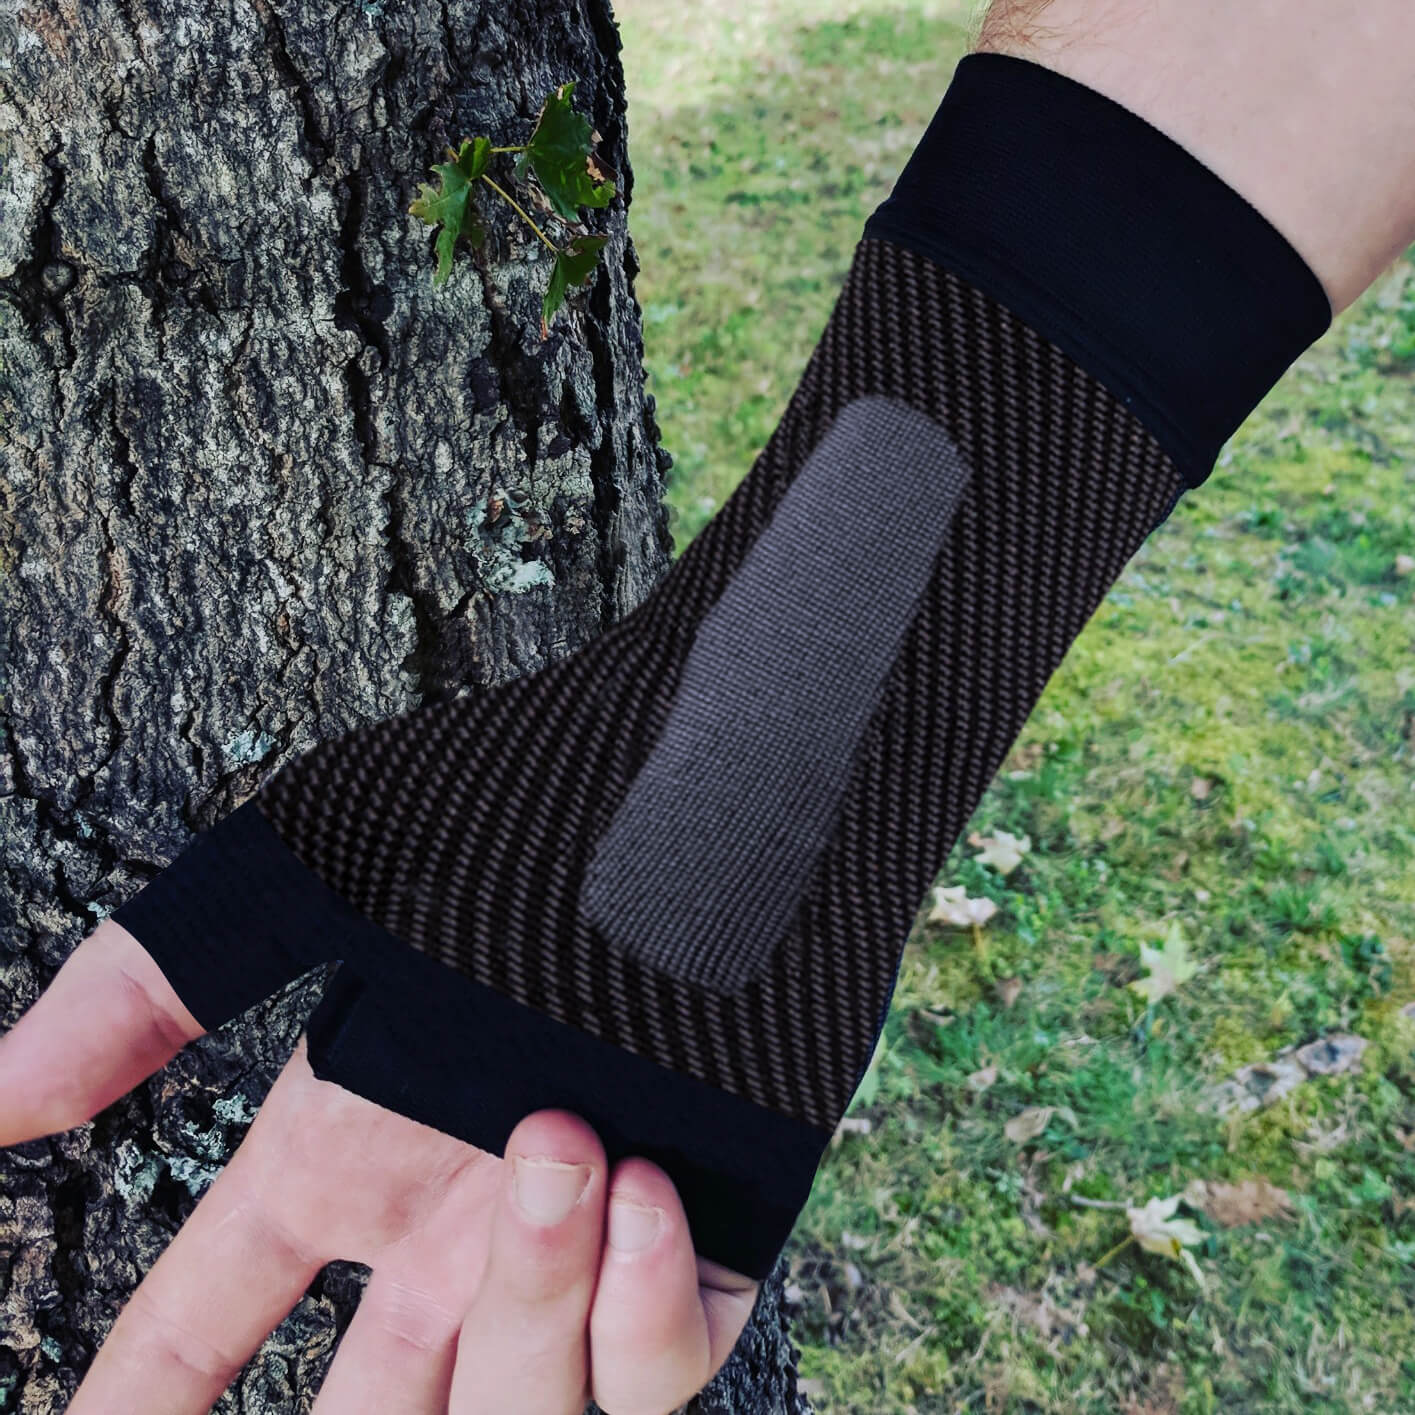 WS6 Performance Wrist Sleeve For Pain Relief